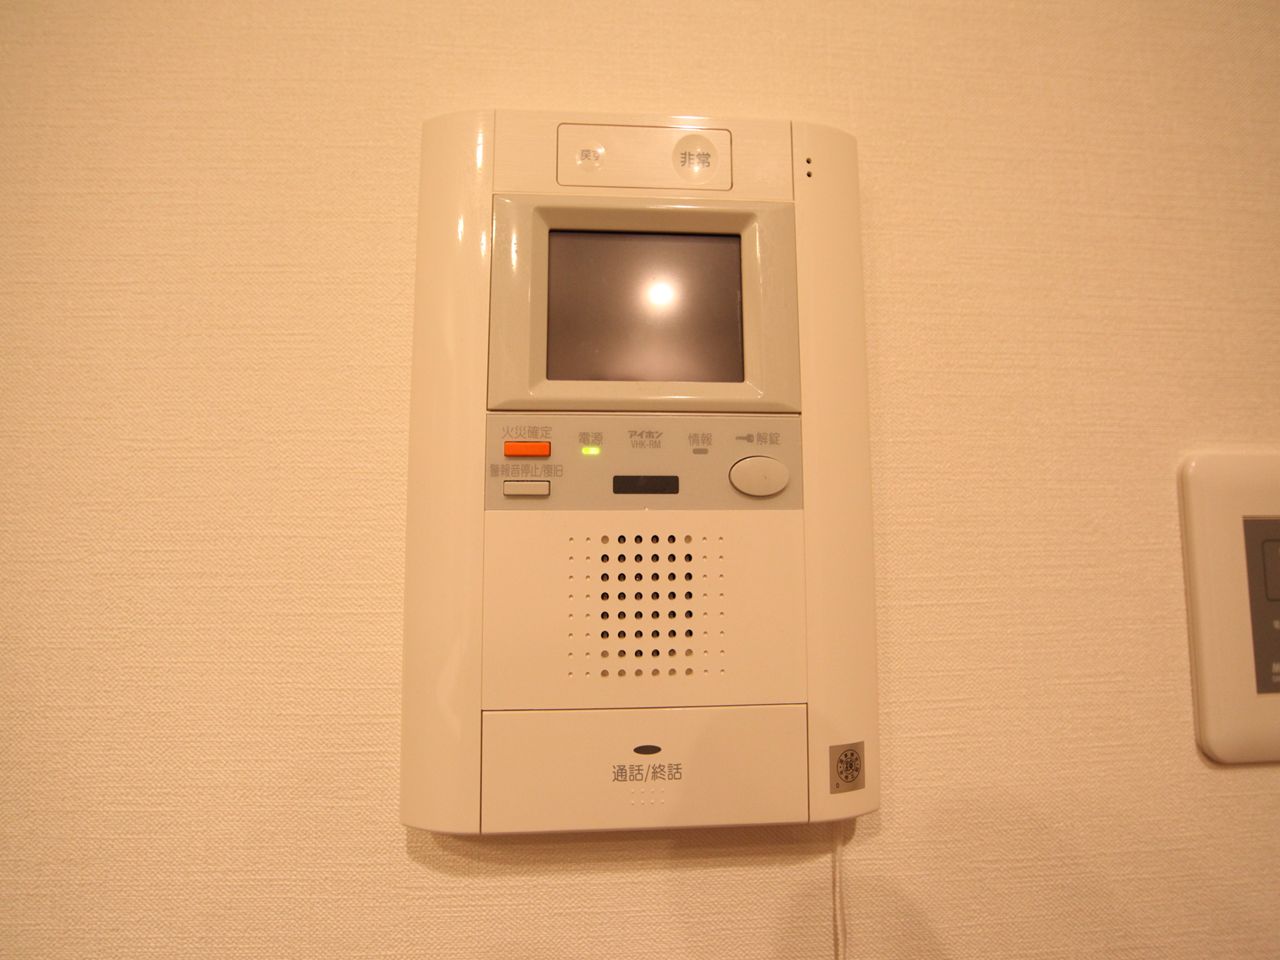 Security. With TV monitor interphone equipped